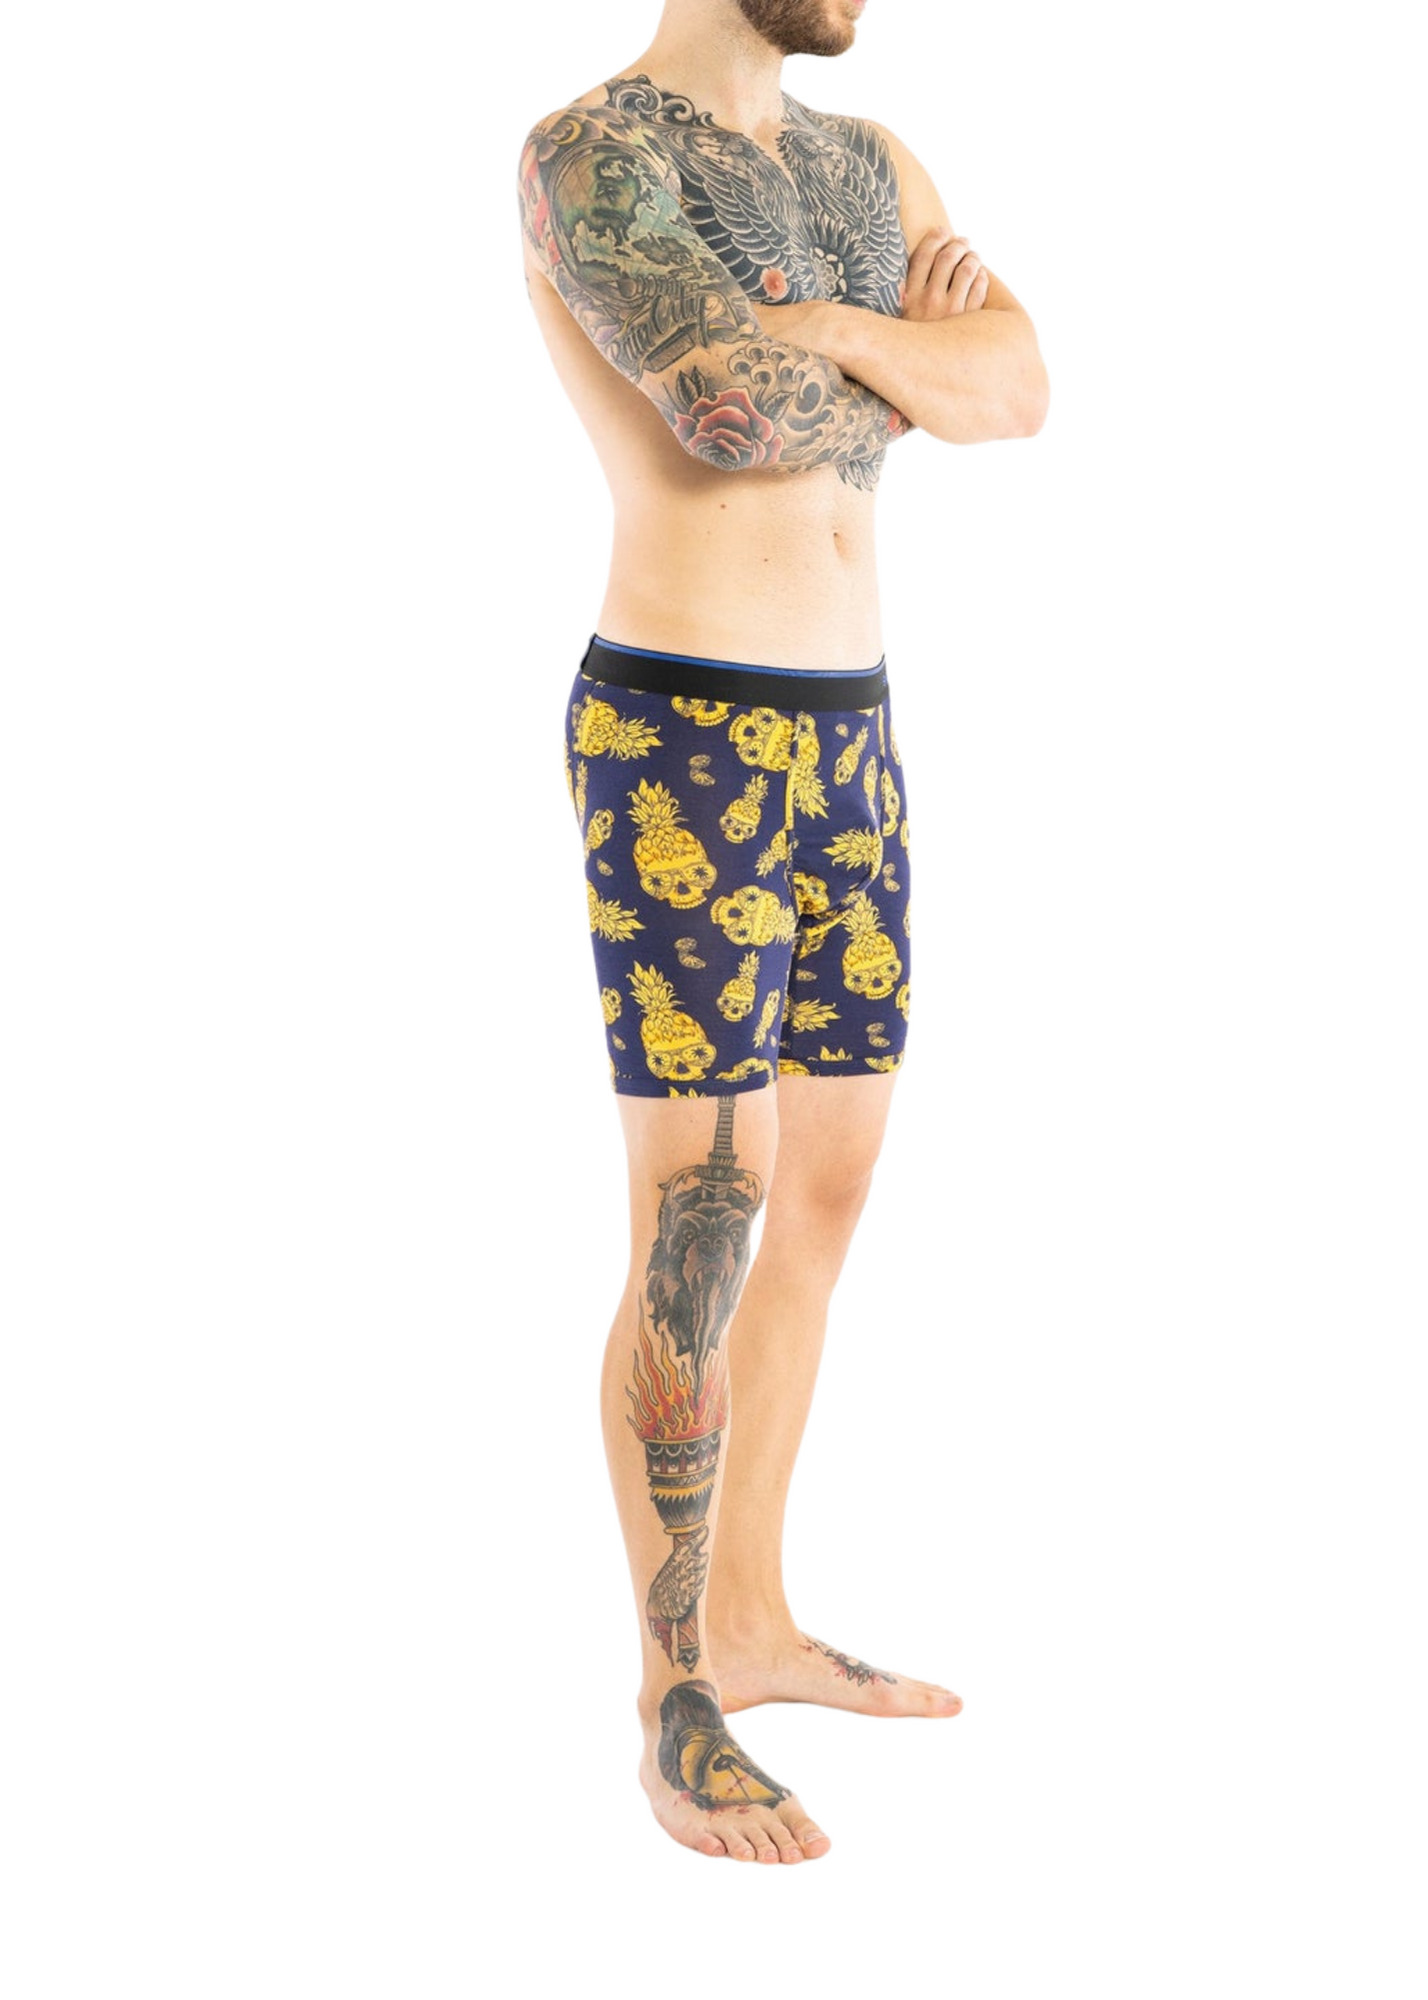 Person wearing BN3TH Boxer Briefs with Pattern of Pineapples with Skull Faces